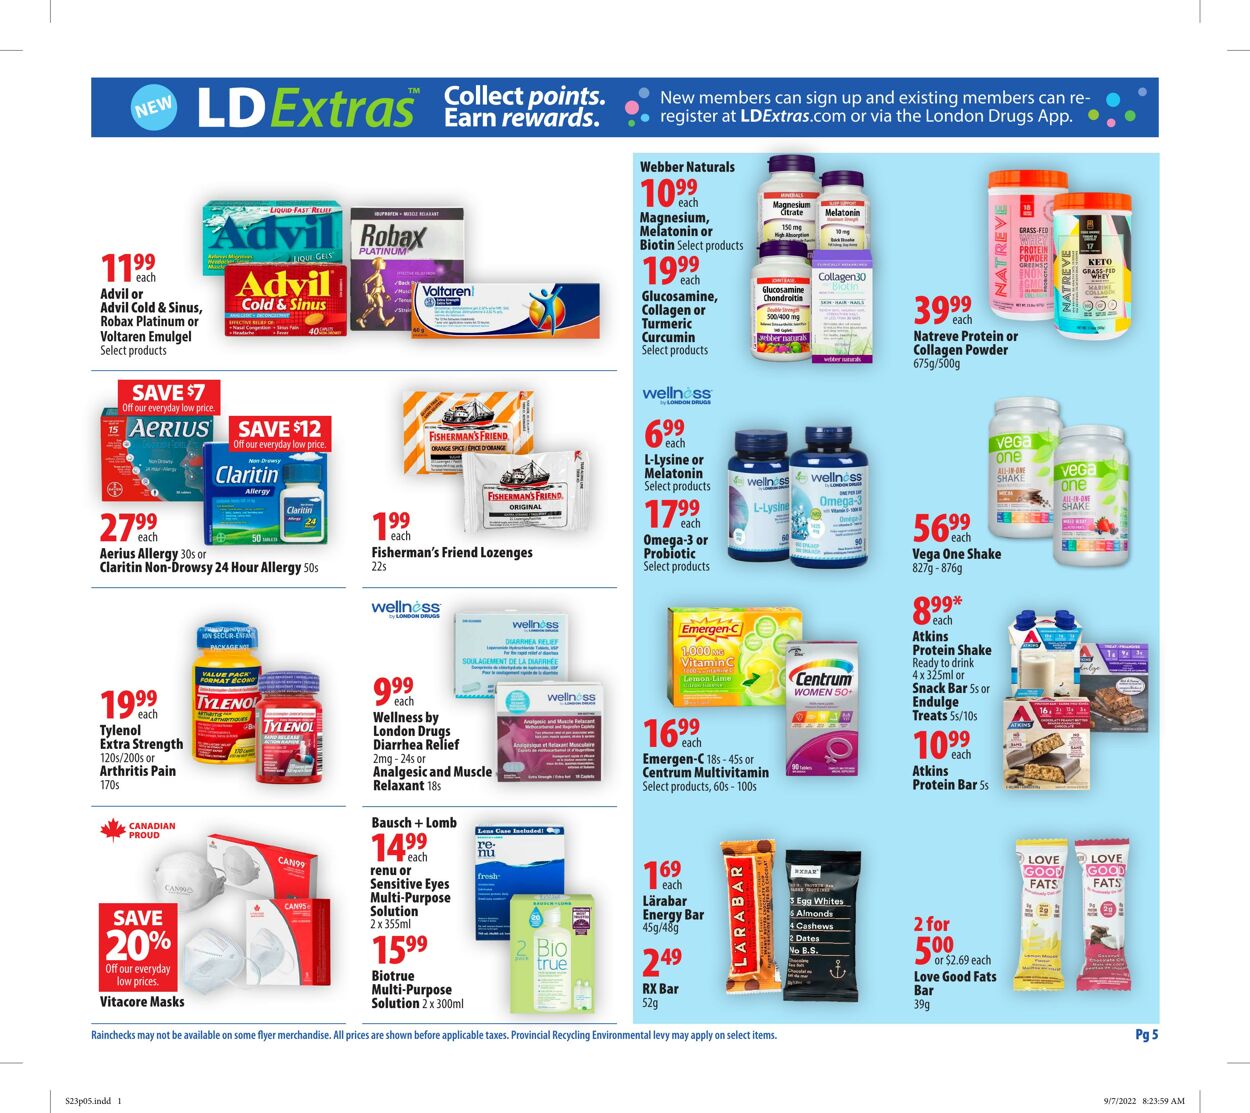 Circulaire London Drugs 23.09.2022-28.09.2022